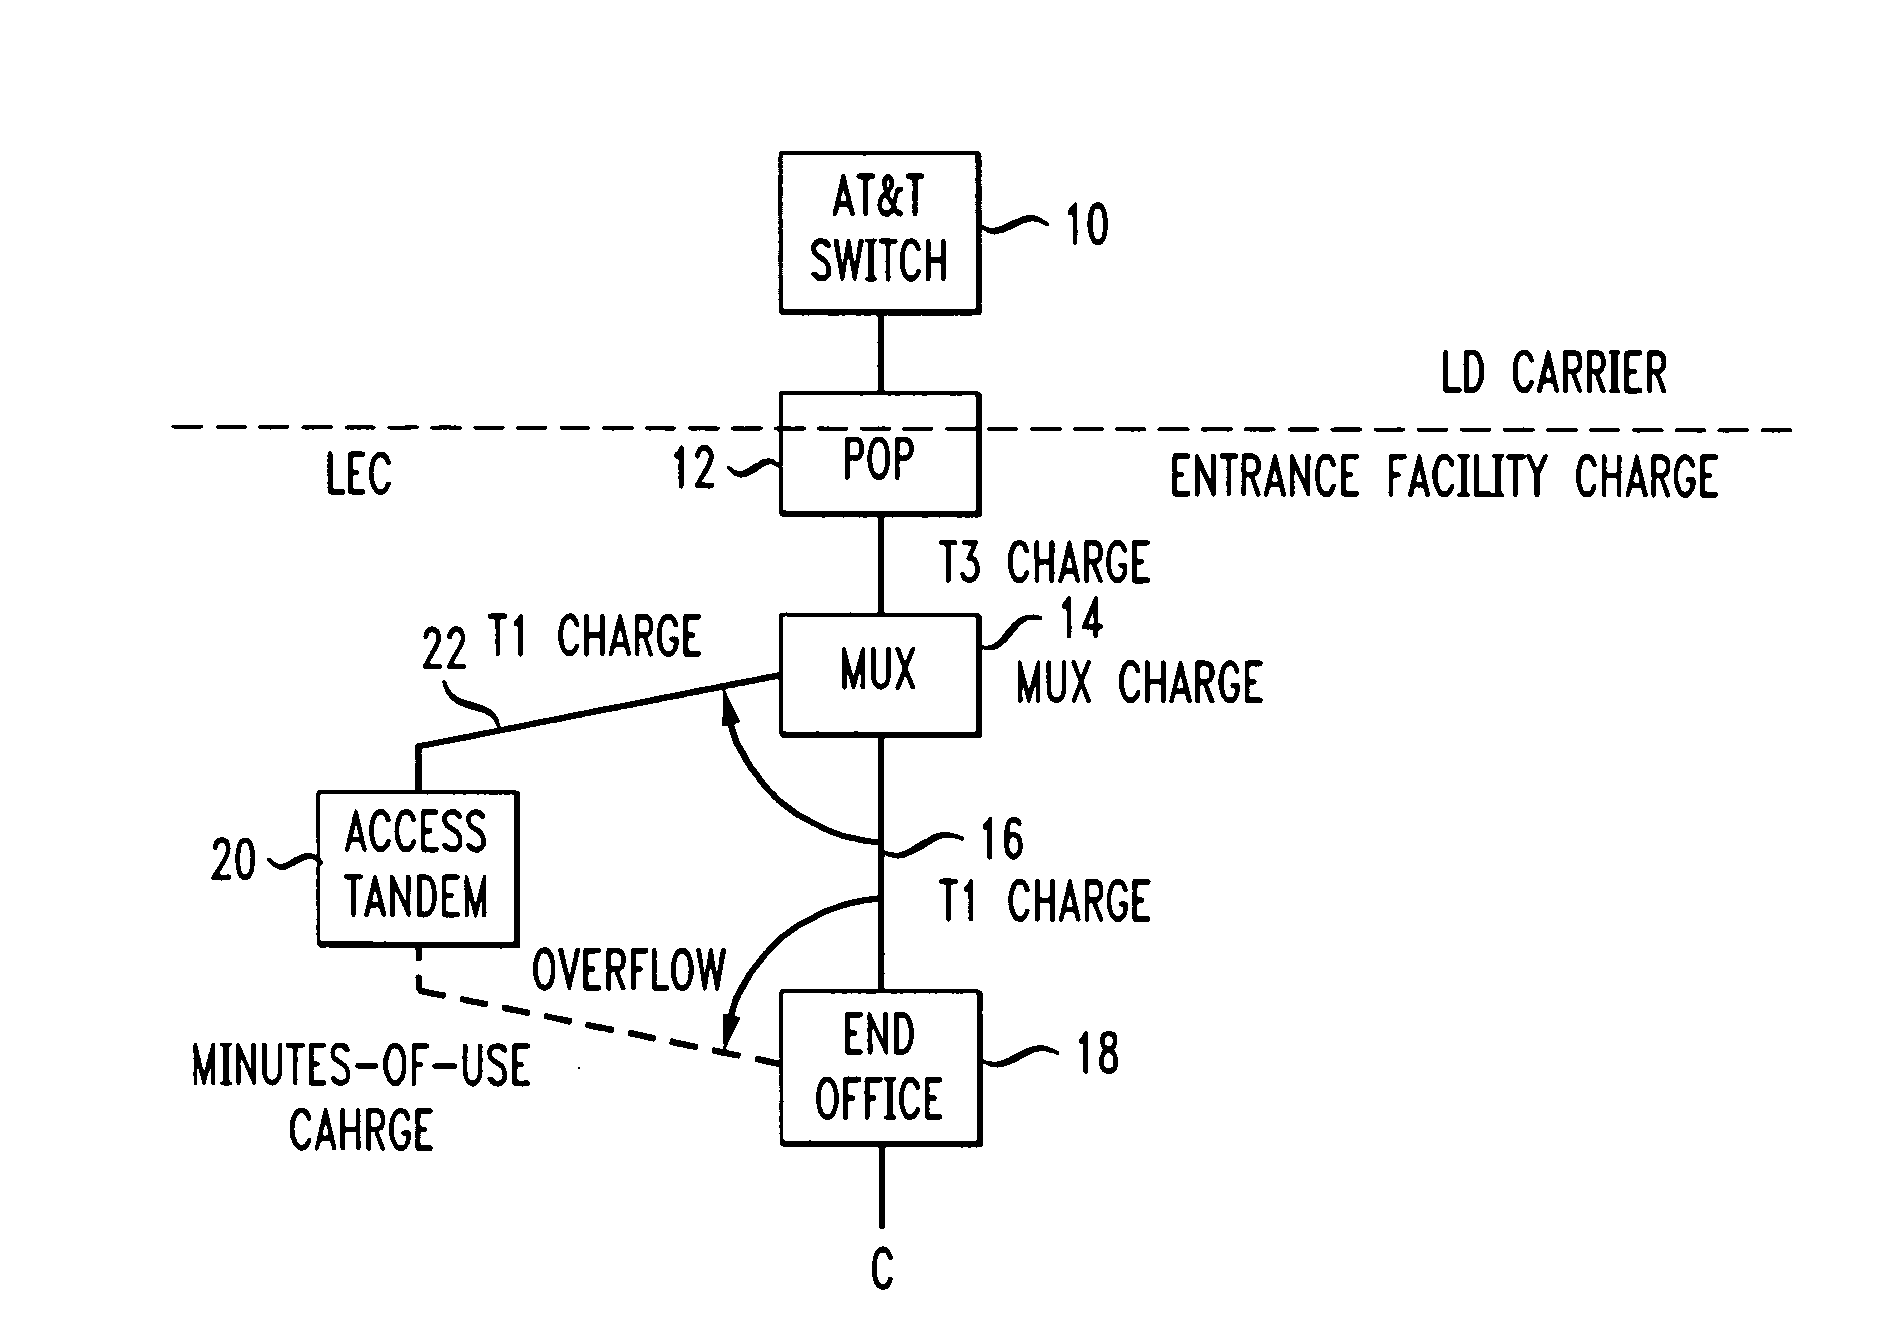 Switched-access network optimization methodology